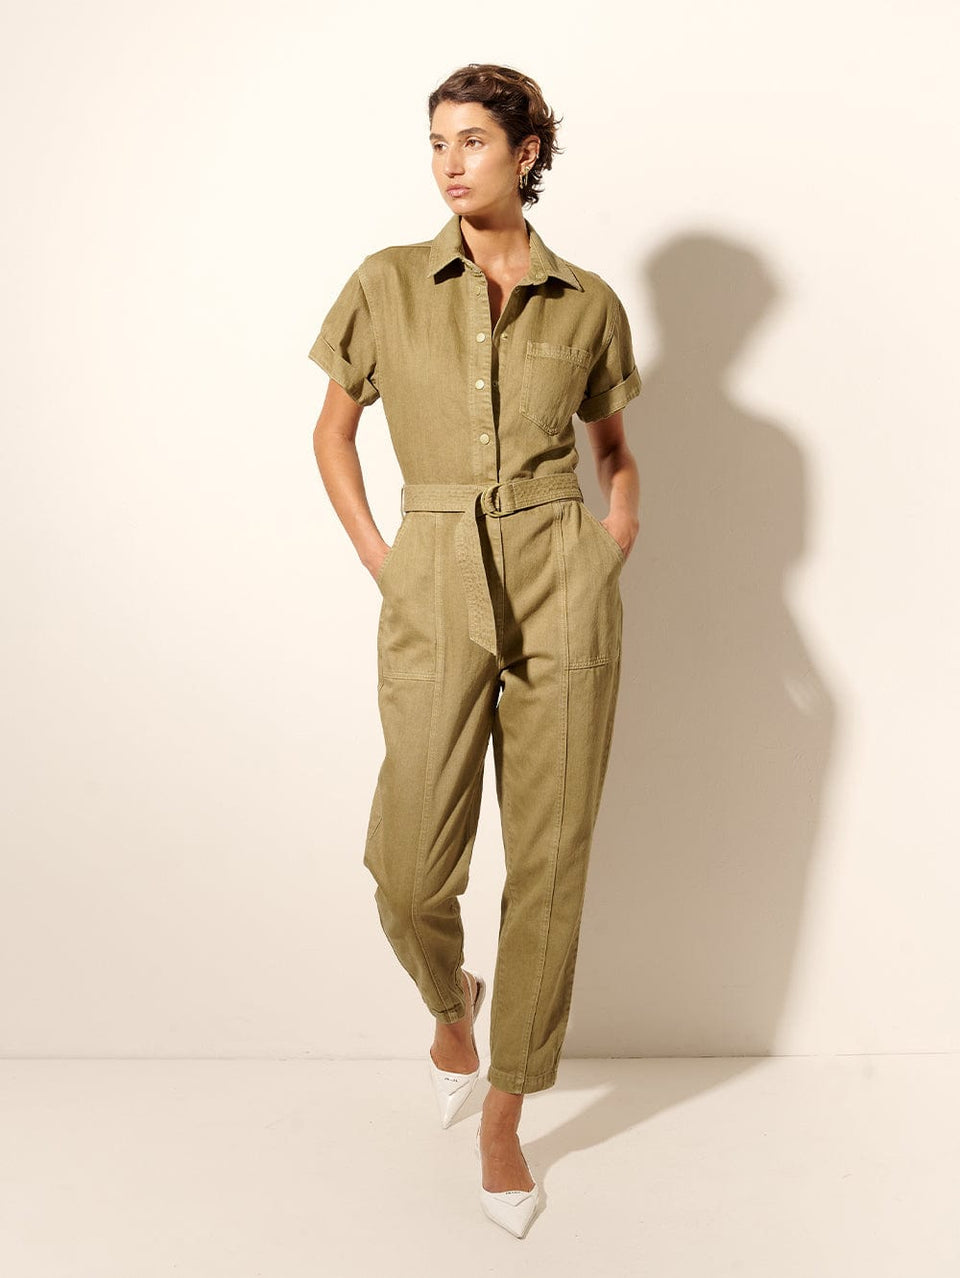 CALIA by Carrie Underwood Gray Jumpsuits & Rompers for Women